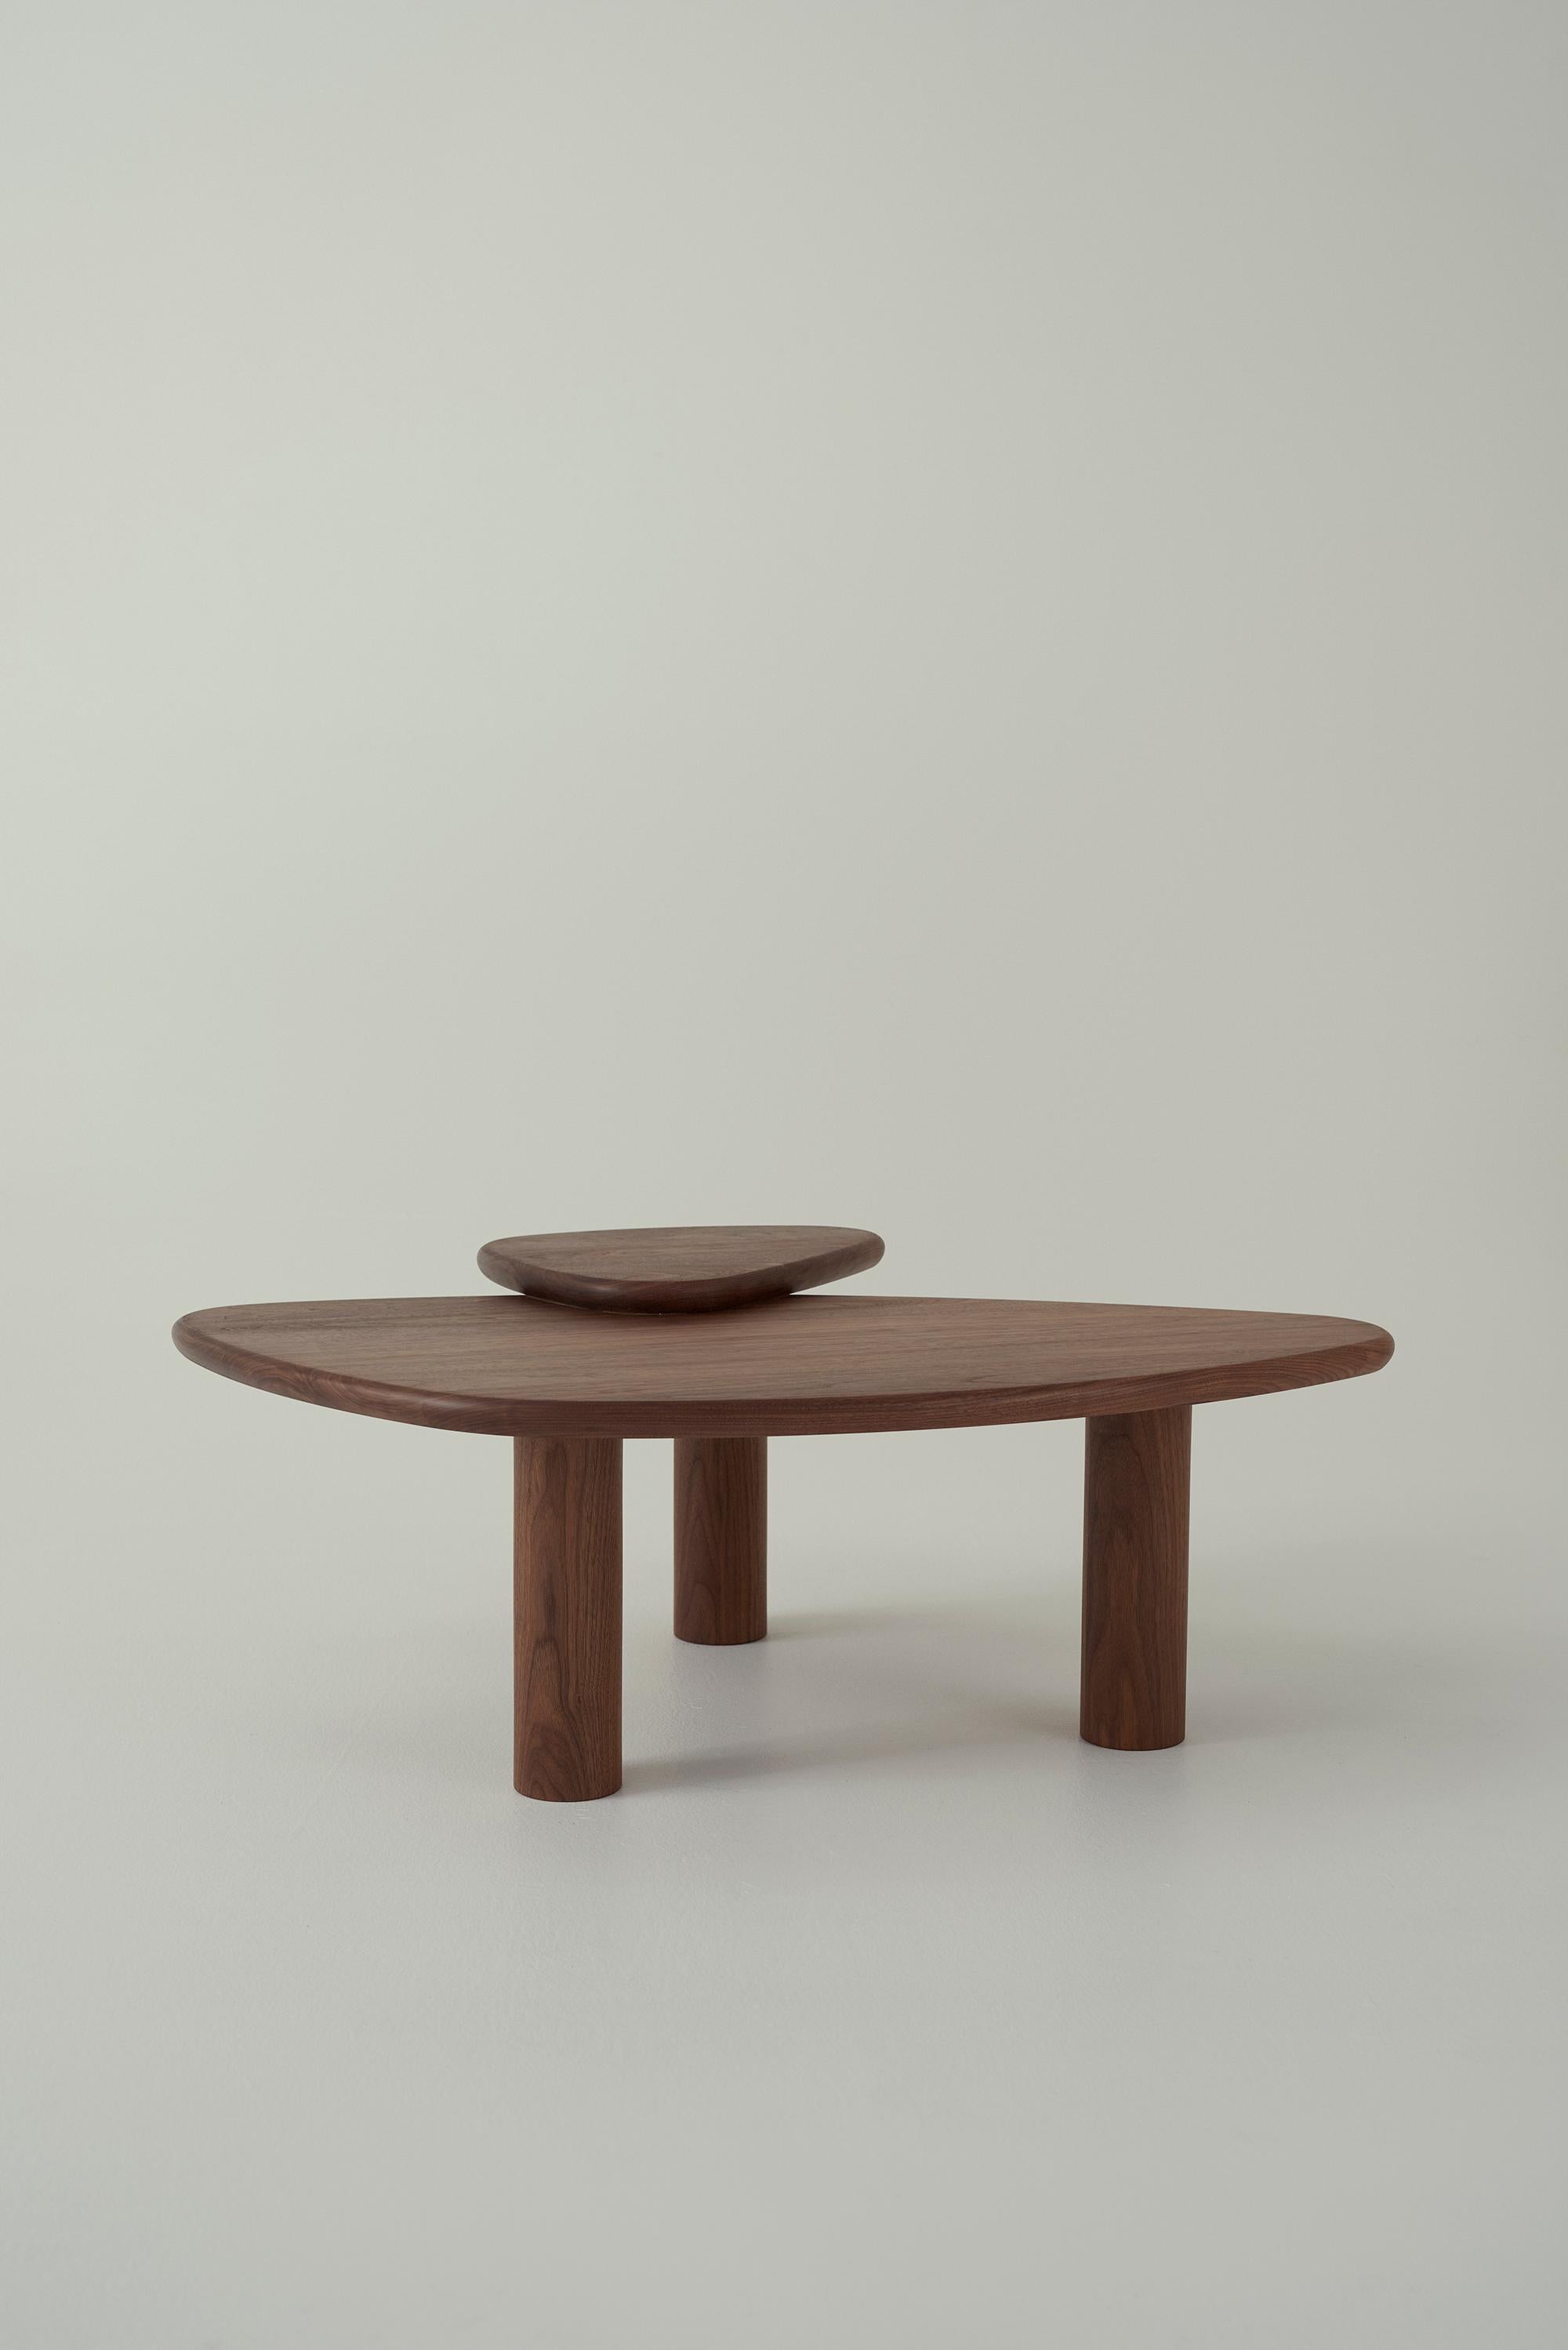 Continuing our legacy of artisanal furniture inspired by the Australian landscape, Pipi Coffee Table looks to the form of a pipi clam for deferent guidance.

Two tiered shell-like forms come together to form a low -lying, organic modernist